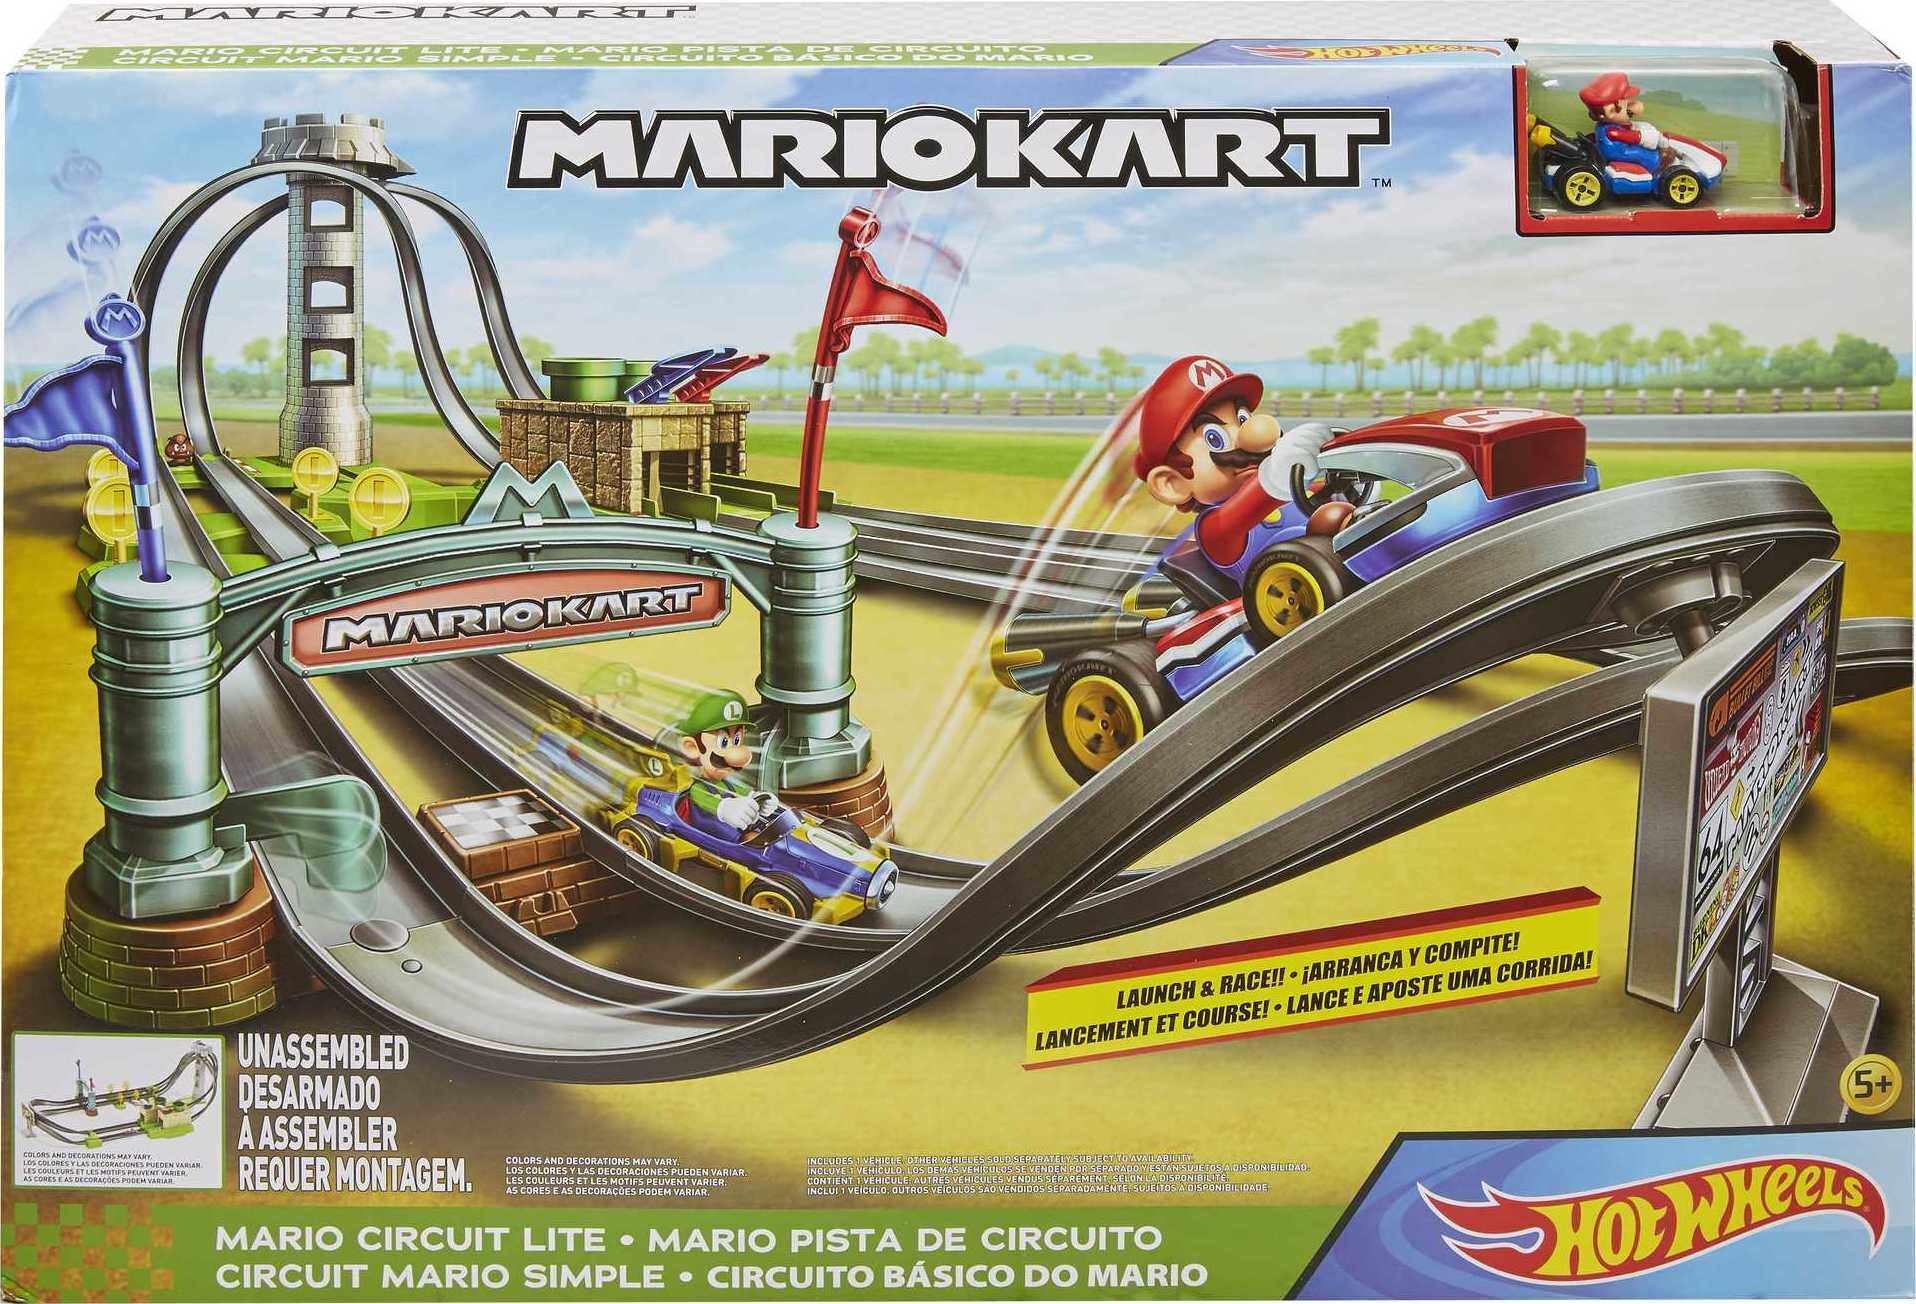 Hot Wheels Mario Kart Circuit Lite Track Set with 1:64 Scale Toy Die-Cast Kart Vehicle & Launcher - image 7 of 7